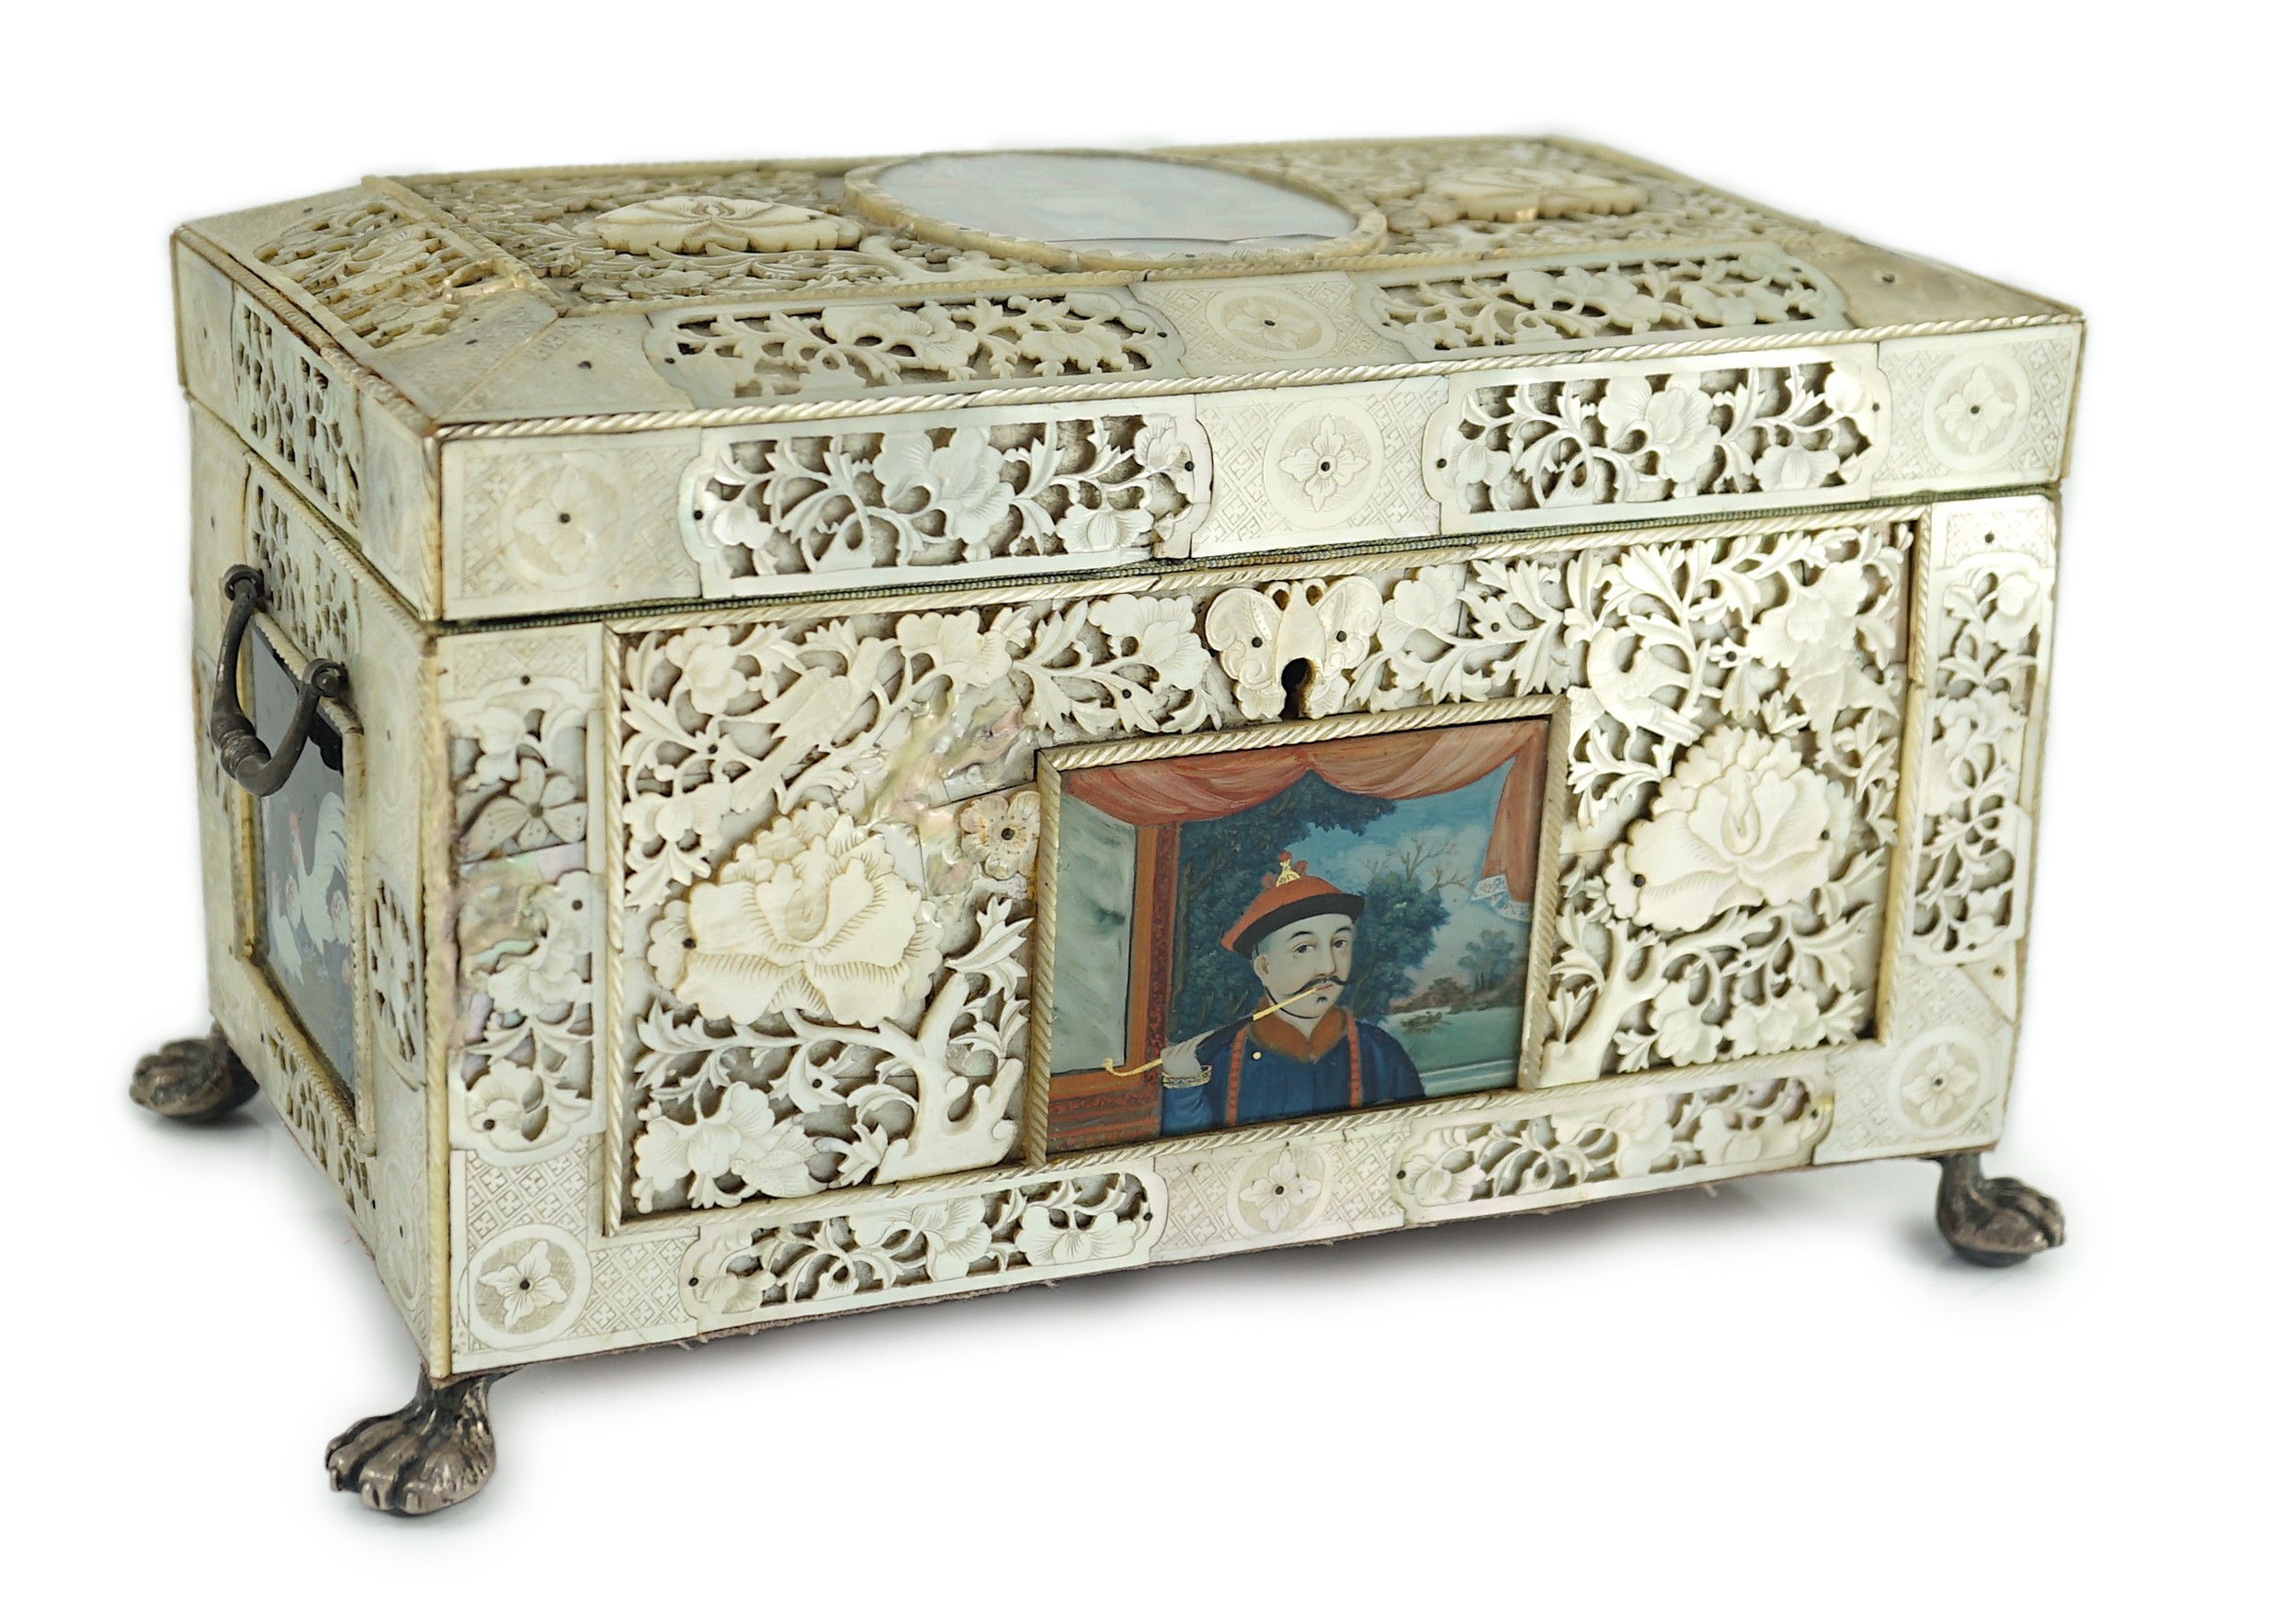 A rare Chinese export mother-of-pearl and reverse painted glass mounted casket, late 18th century, 27.5cm wide at feet, 15.5cm high, some damage                                                                            